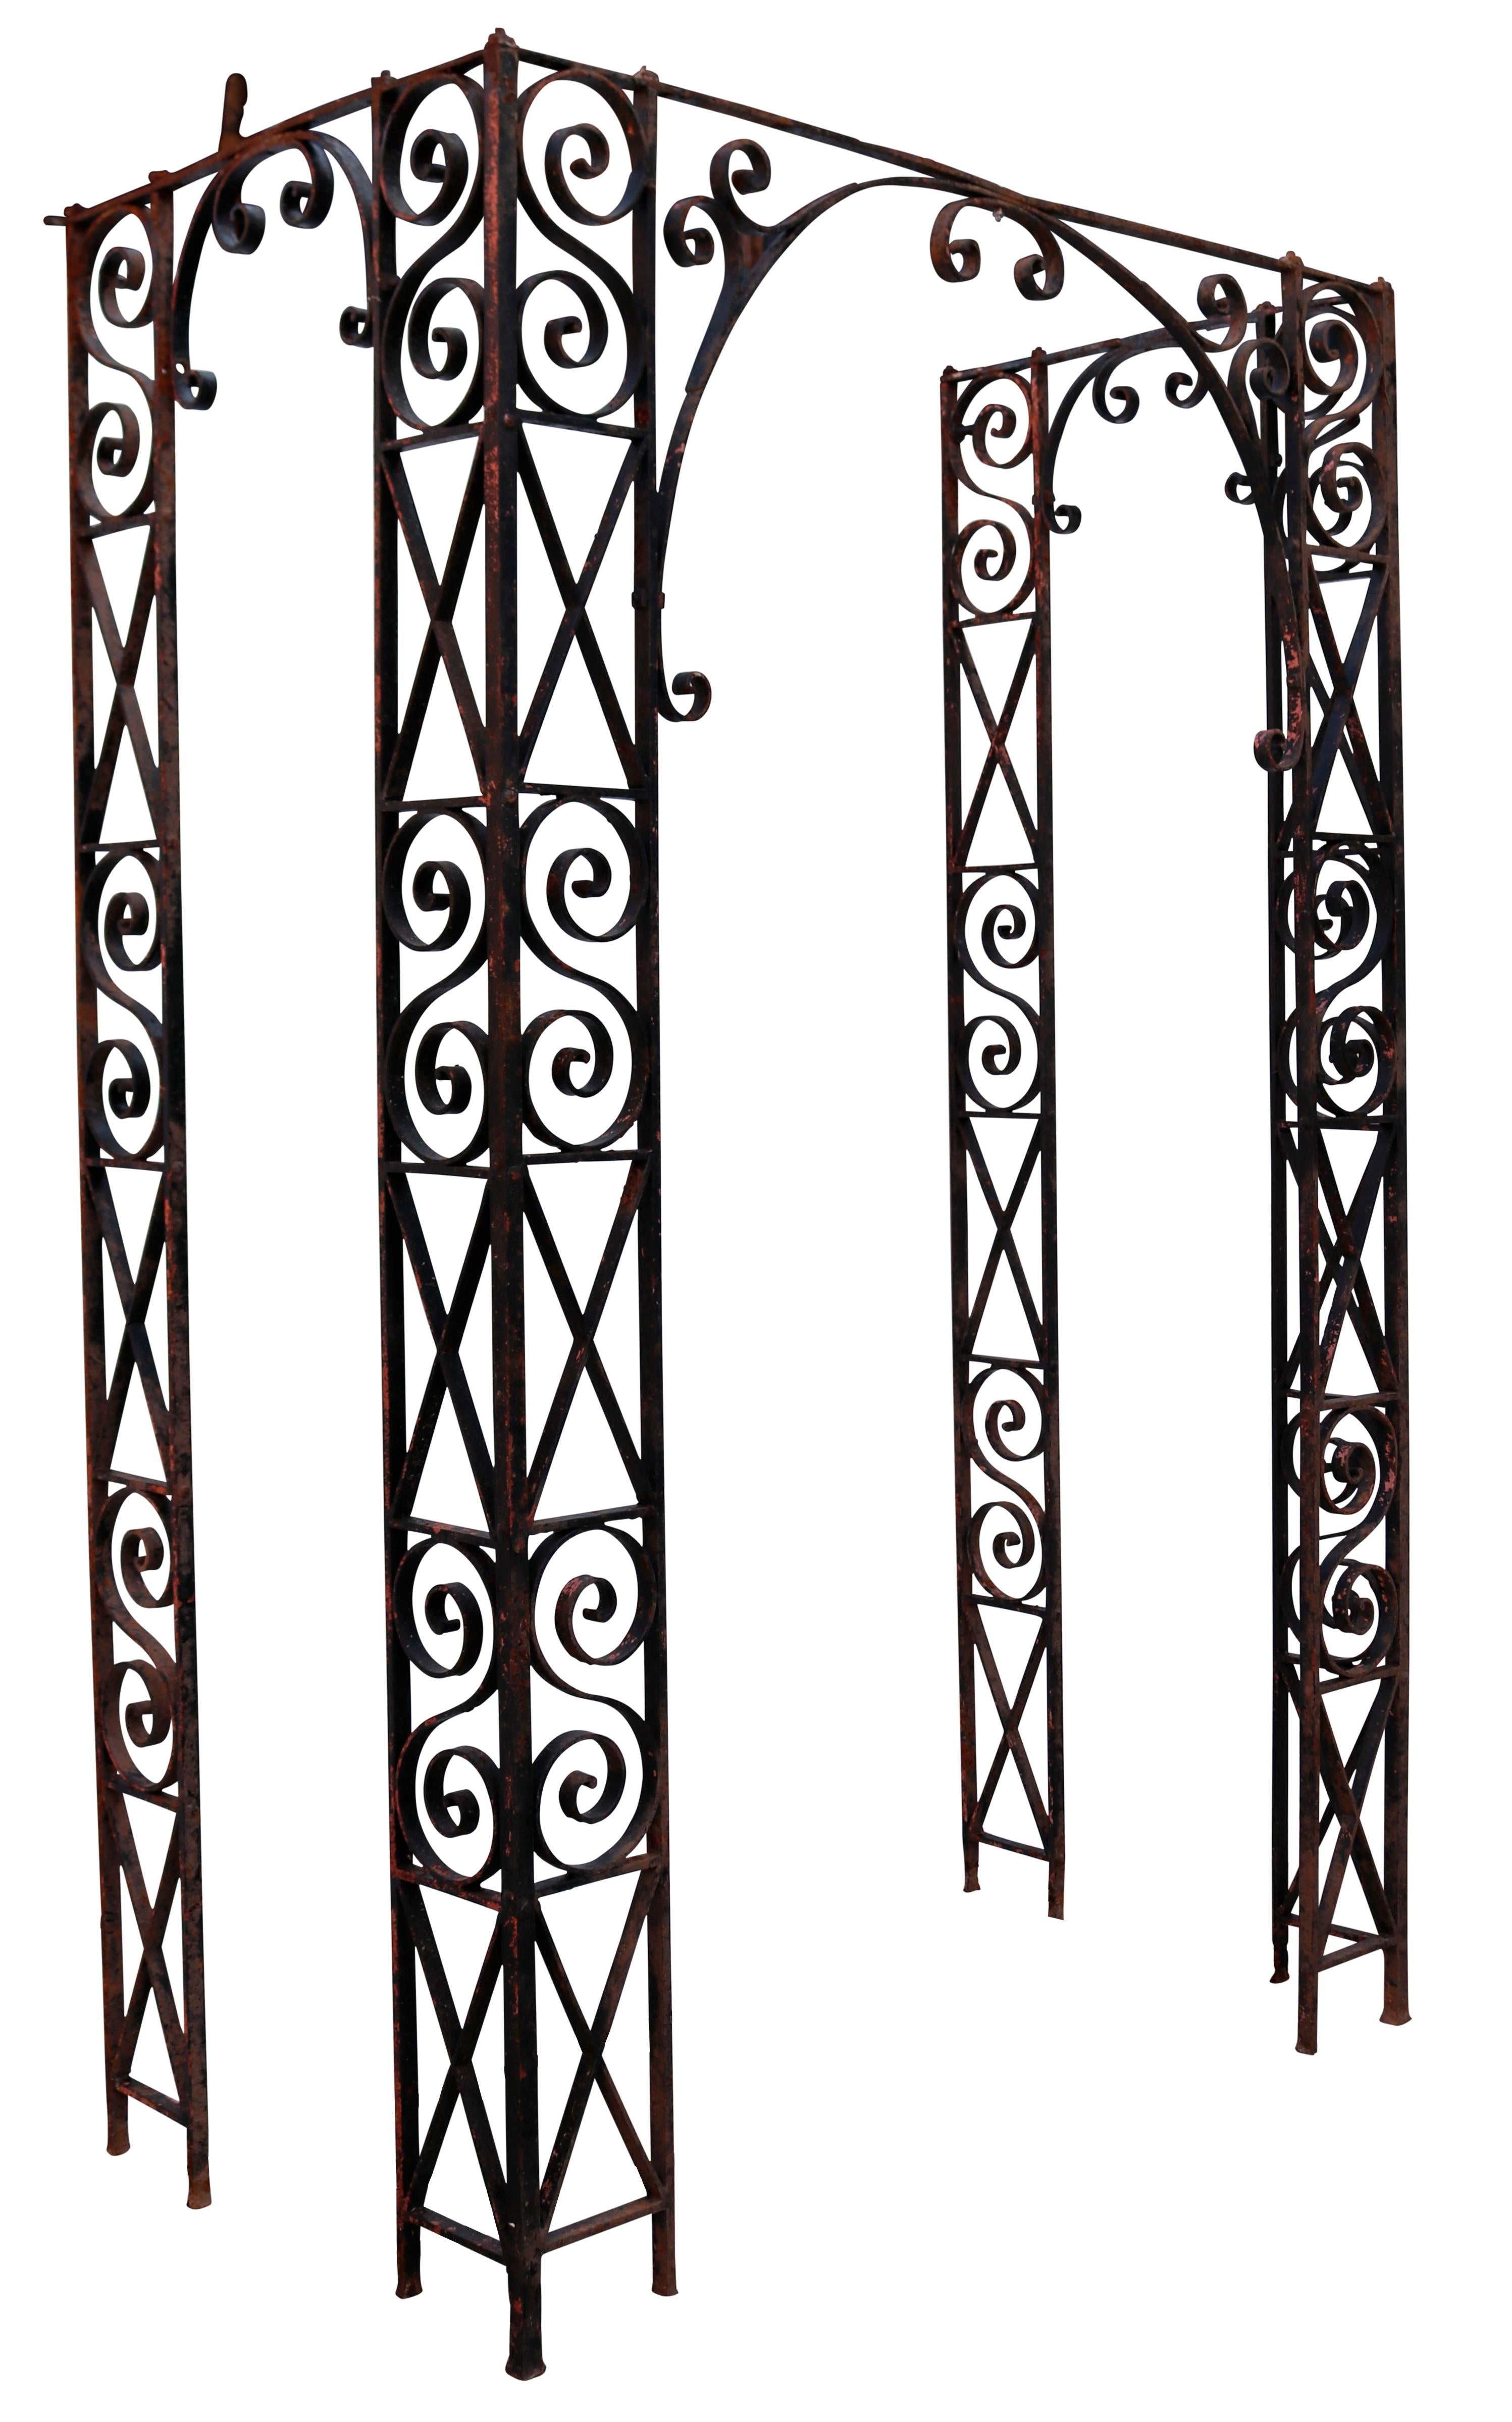 Georgian Wrought Iron Porch Frame. With scroll and cross decoration, dating to circa 1800. There is a temporary frame work at the bottom, for support.

Originally situated in a local farmhouse. Blacksmith made. This could also be used as a garden